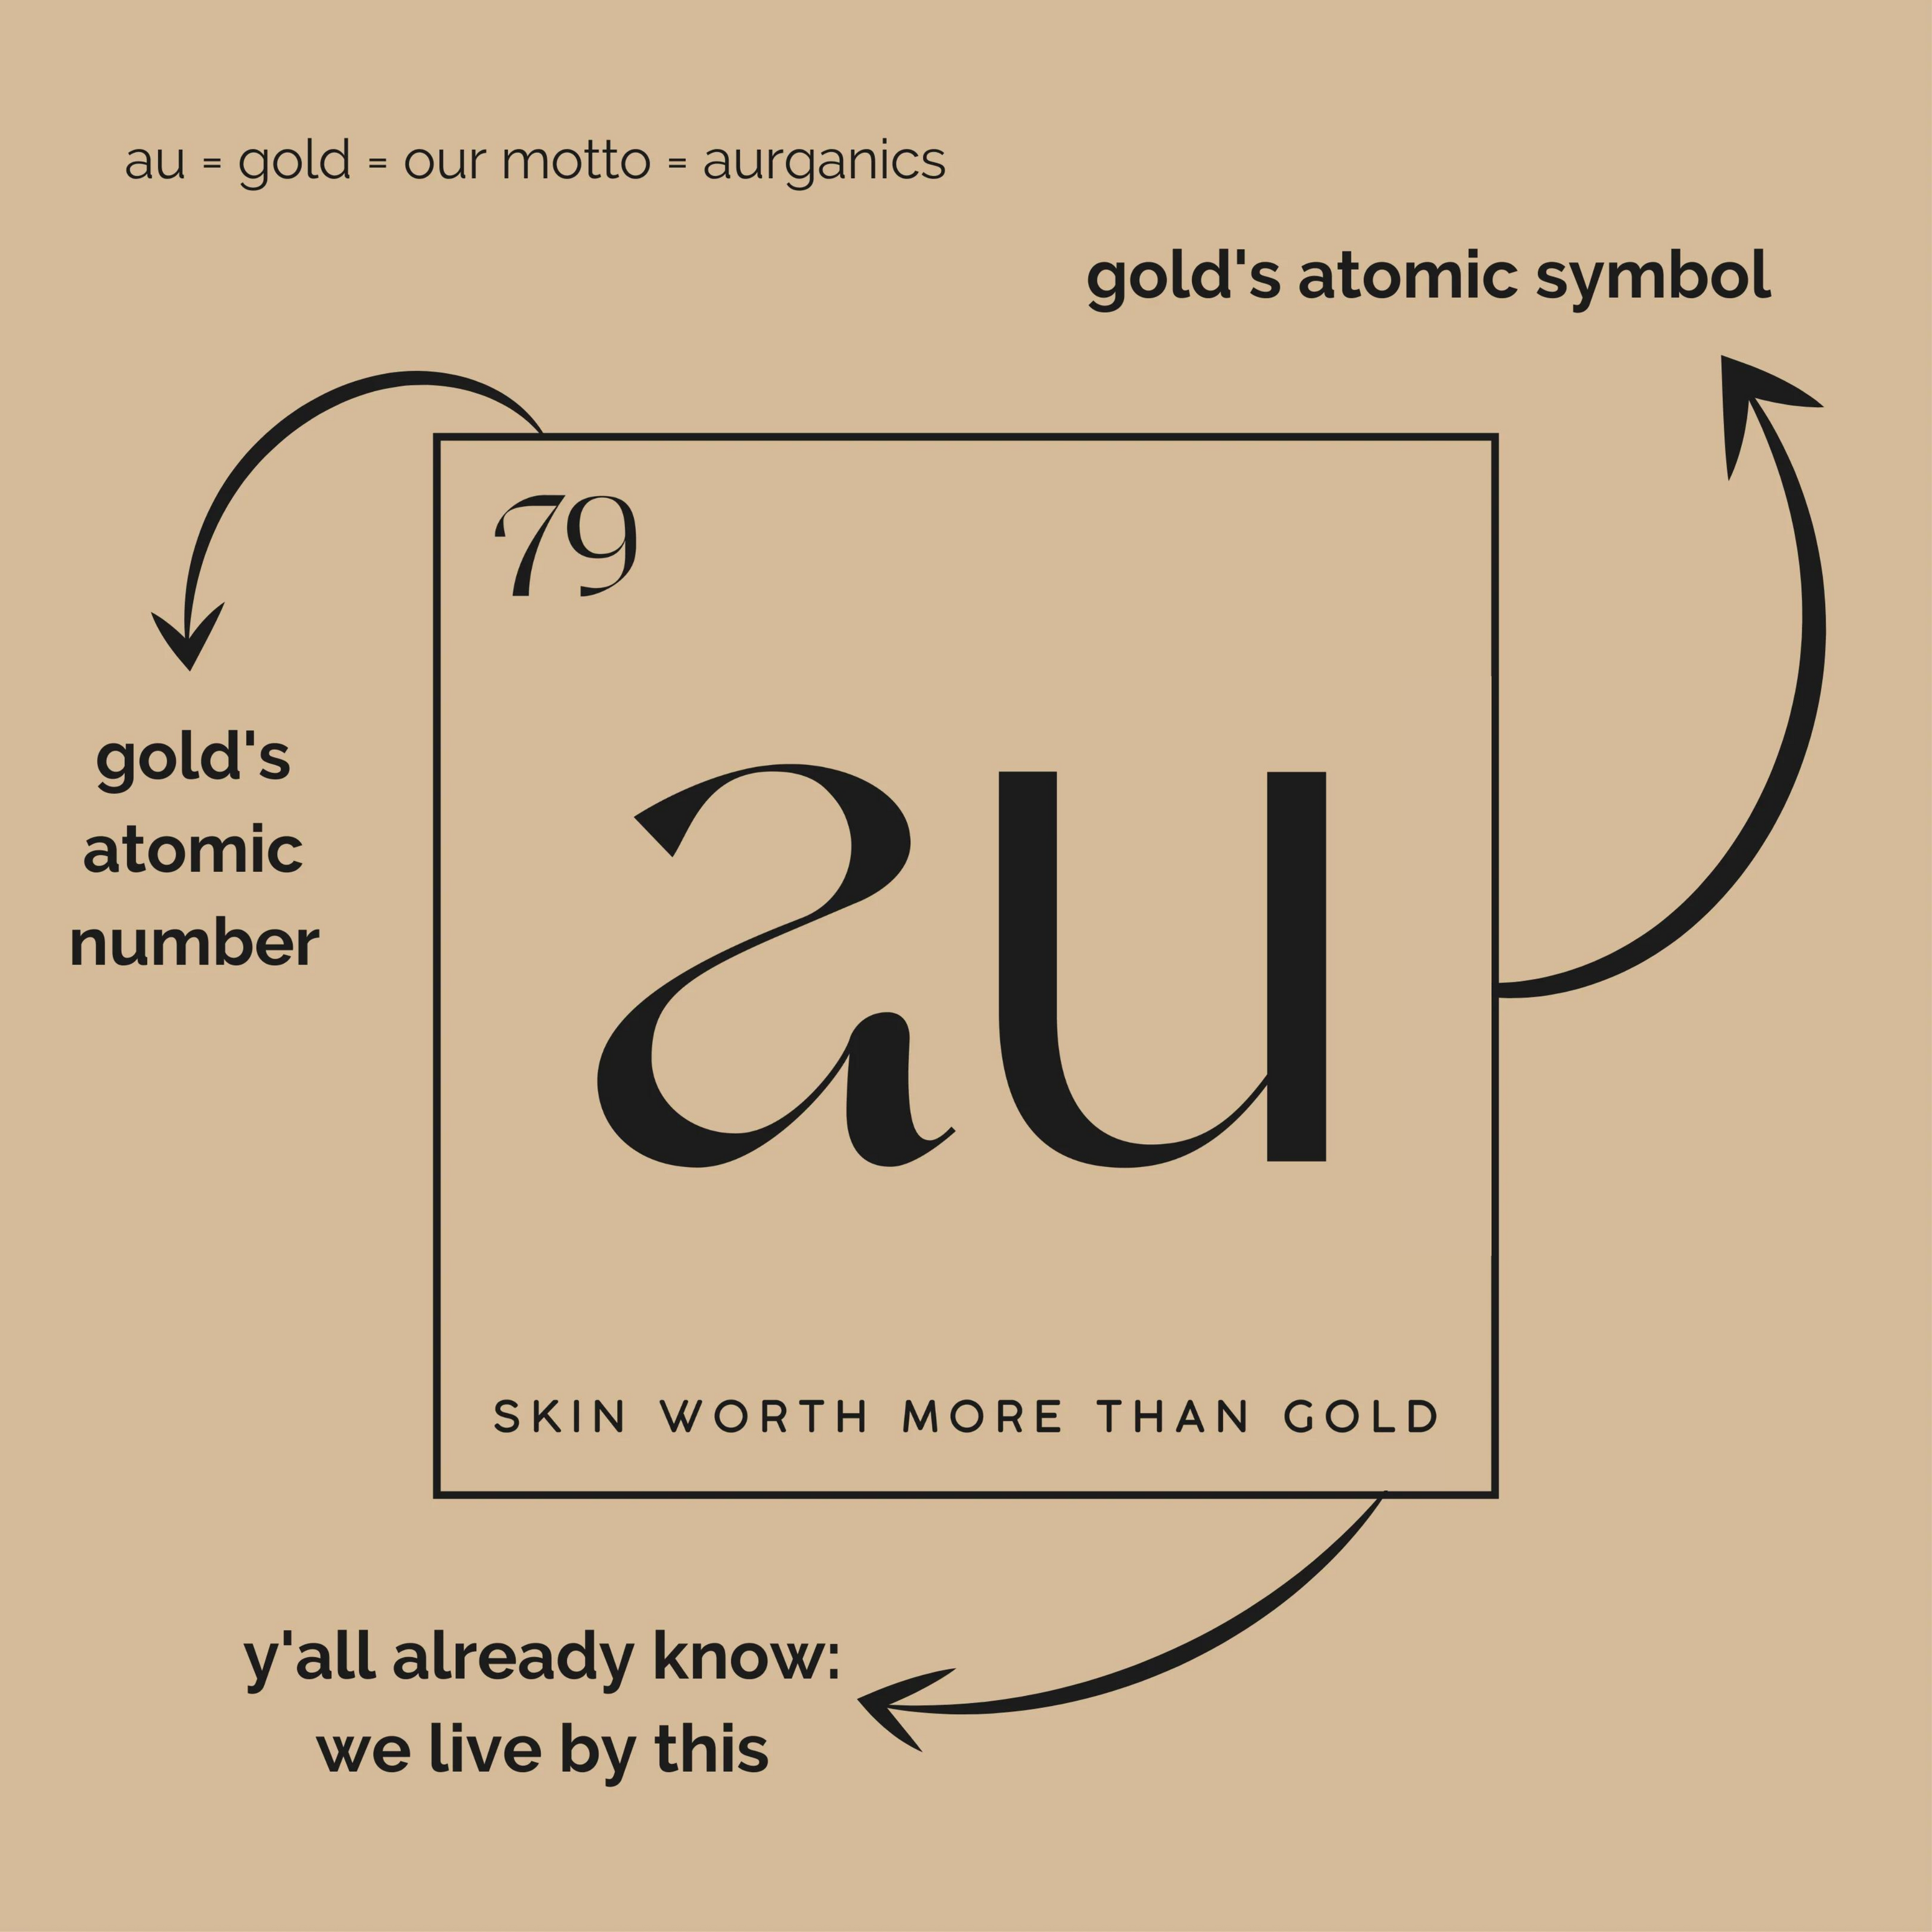 Aurganics Skincare submark breakdown: gold's atomic number 79, gold's atomic symbol Au, and our founding statement: our melanated skin is worth more than gold.